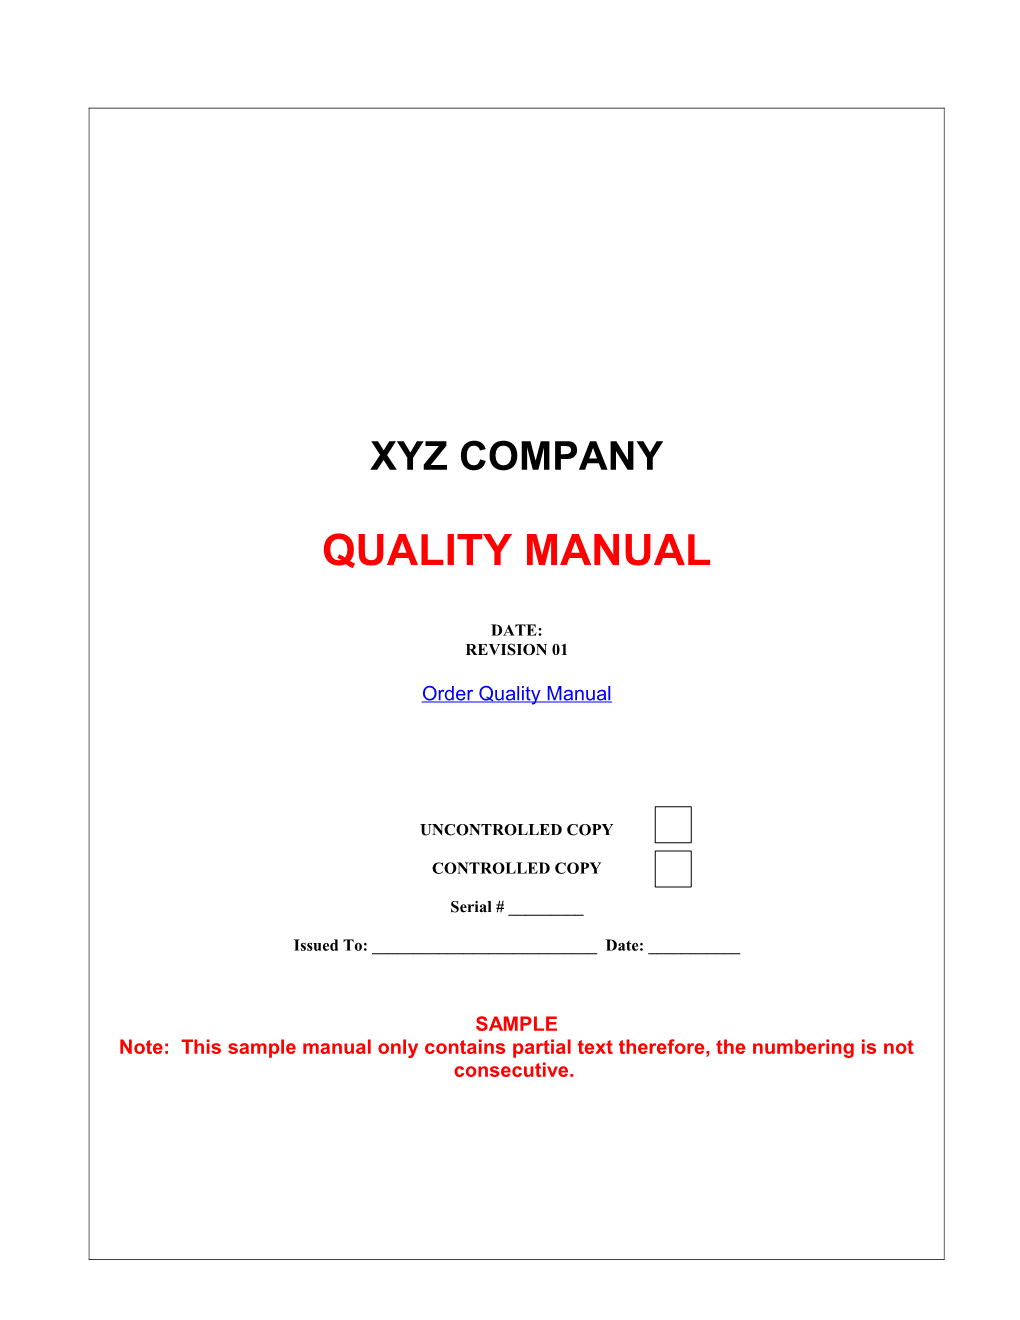 ISO 9001 Quality Manual for Services